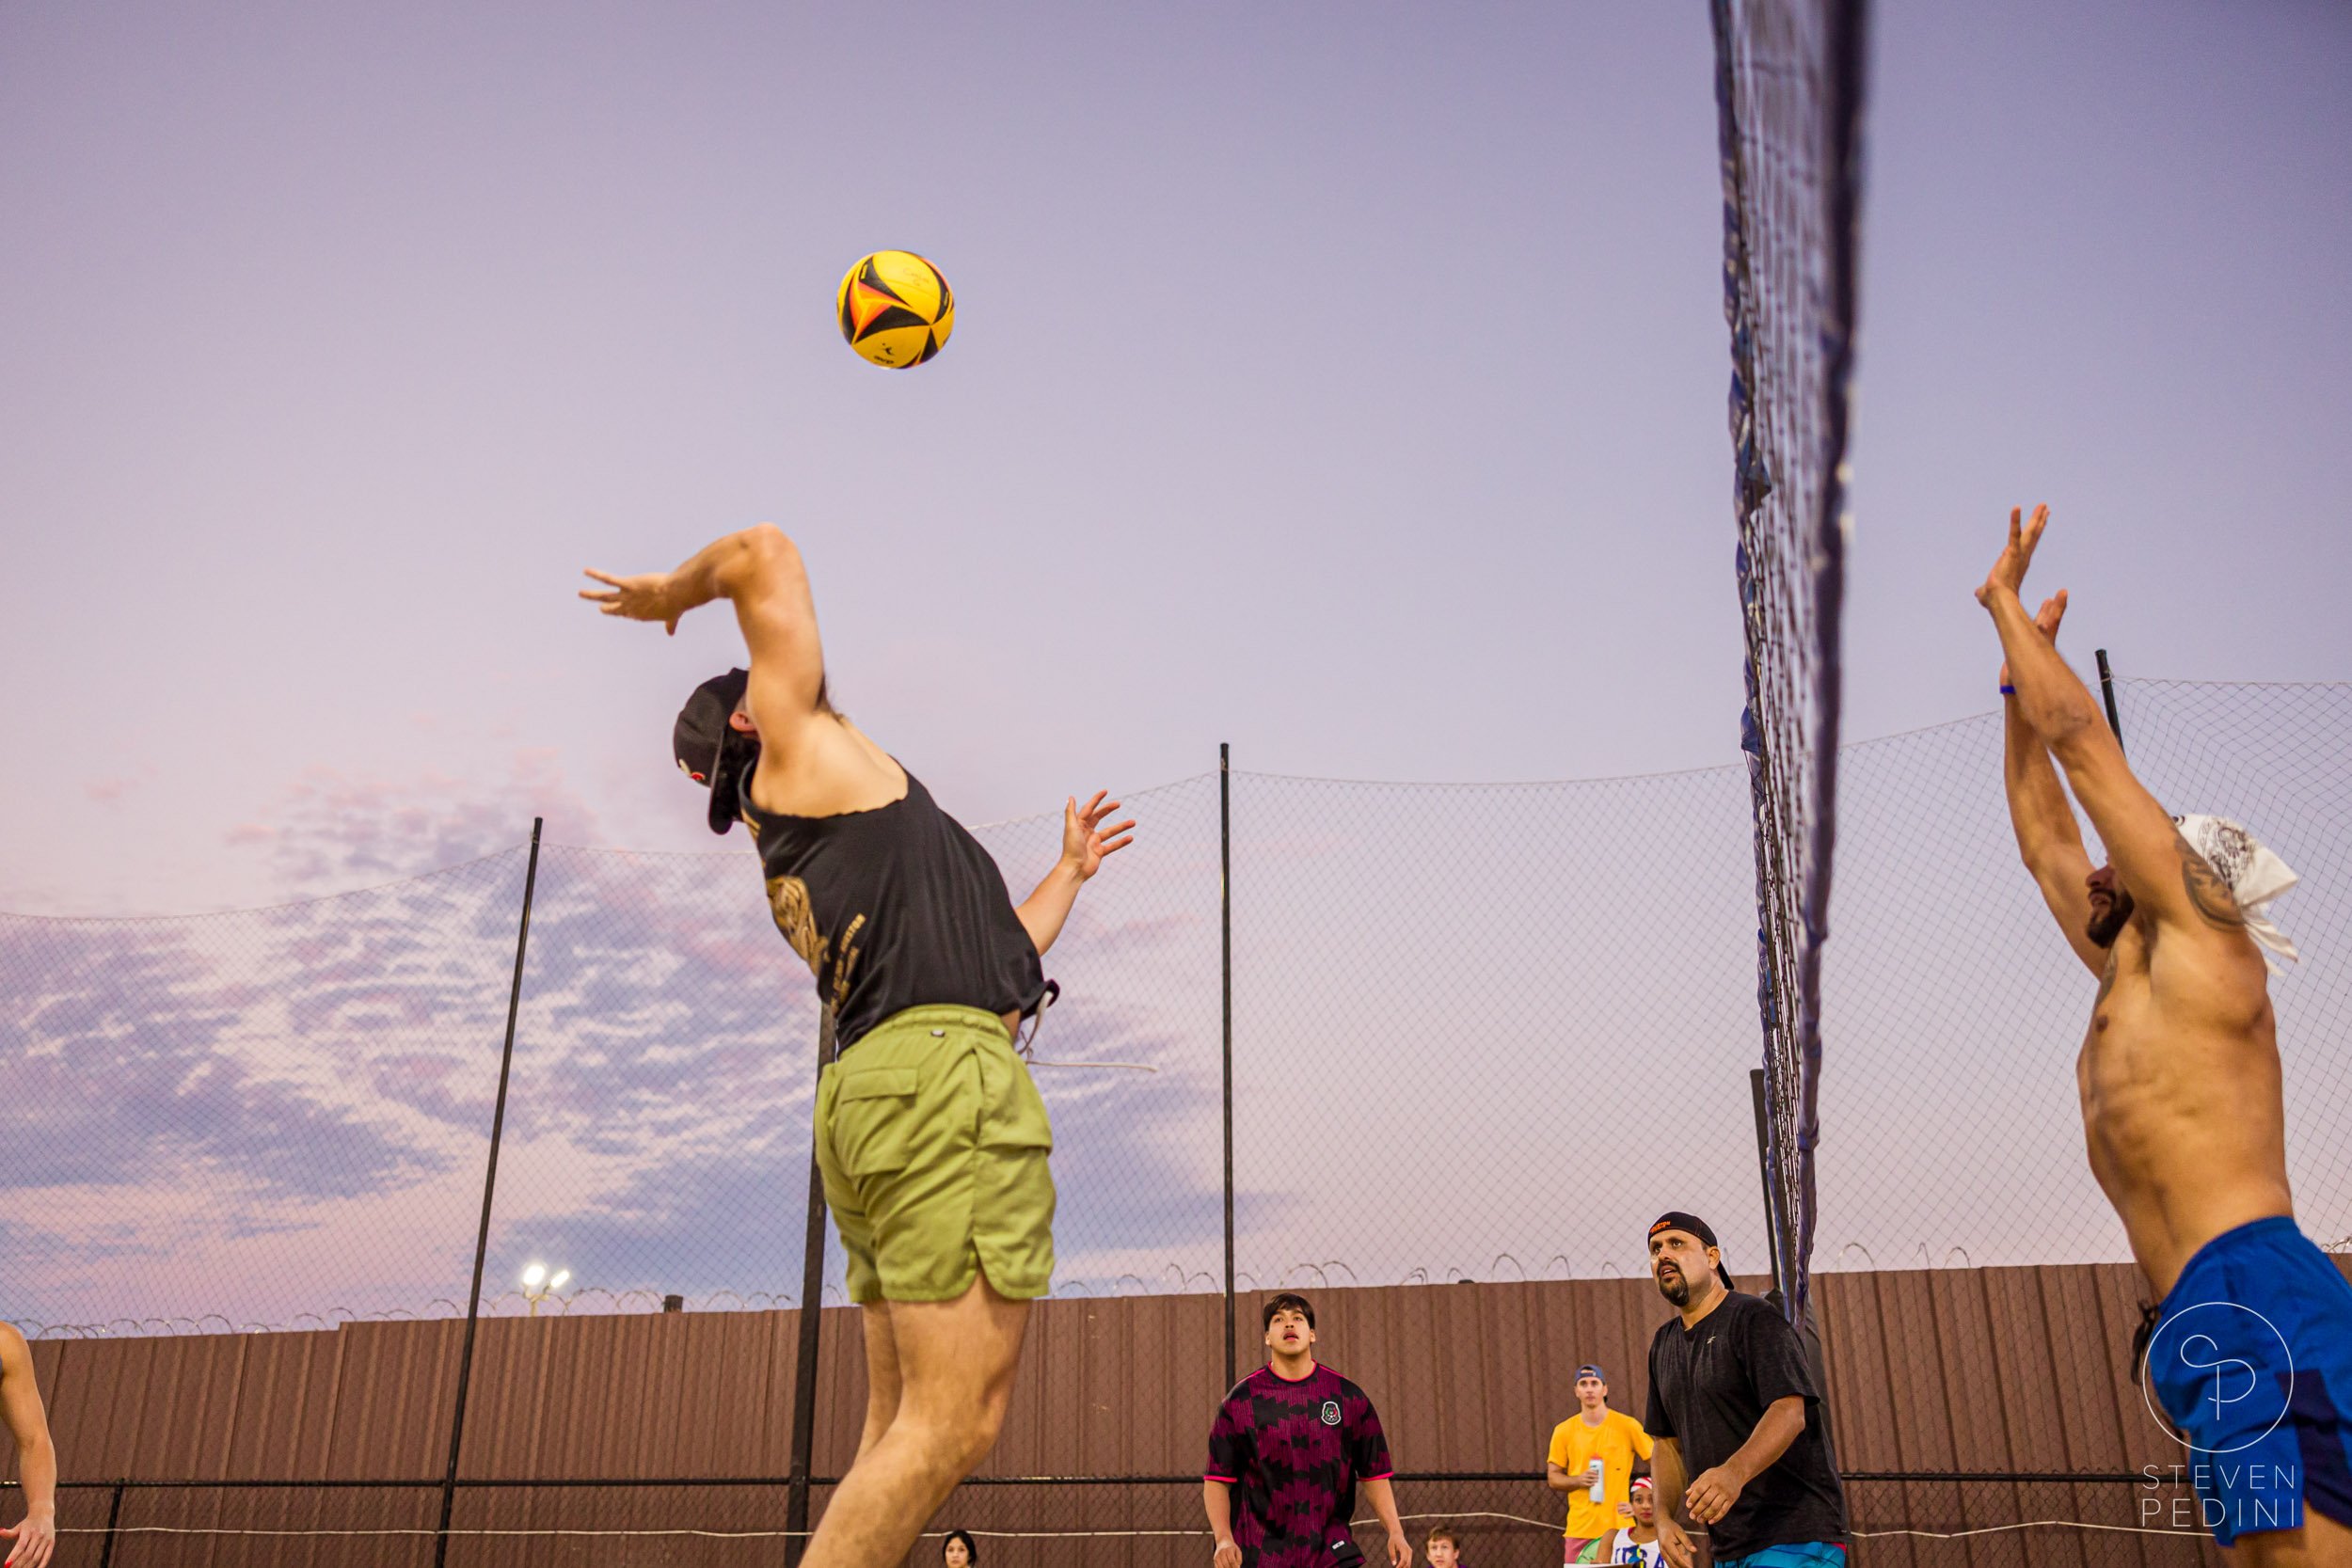 Steven Pedini Photography - Bumpy Pickle - Sand Volleyball - Houston TX - World Cup of Volleyball - 00270.jpg